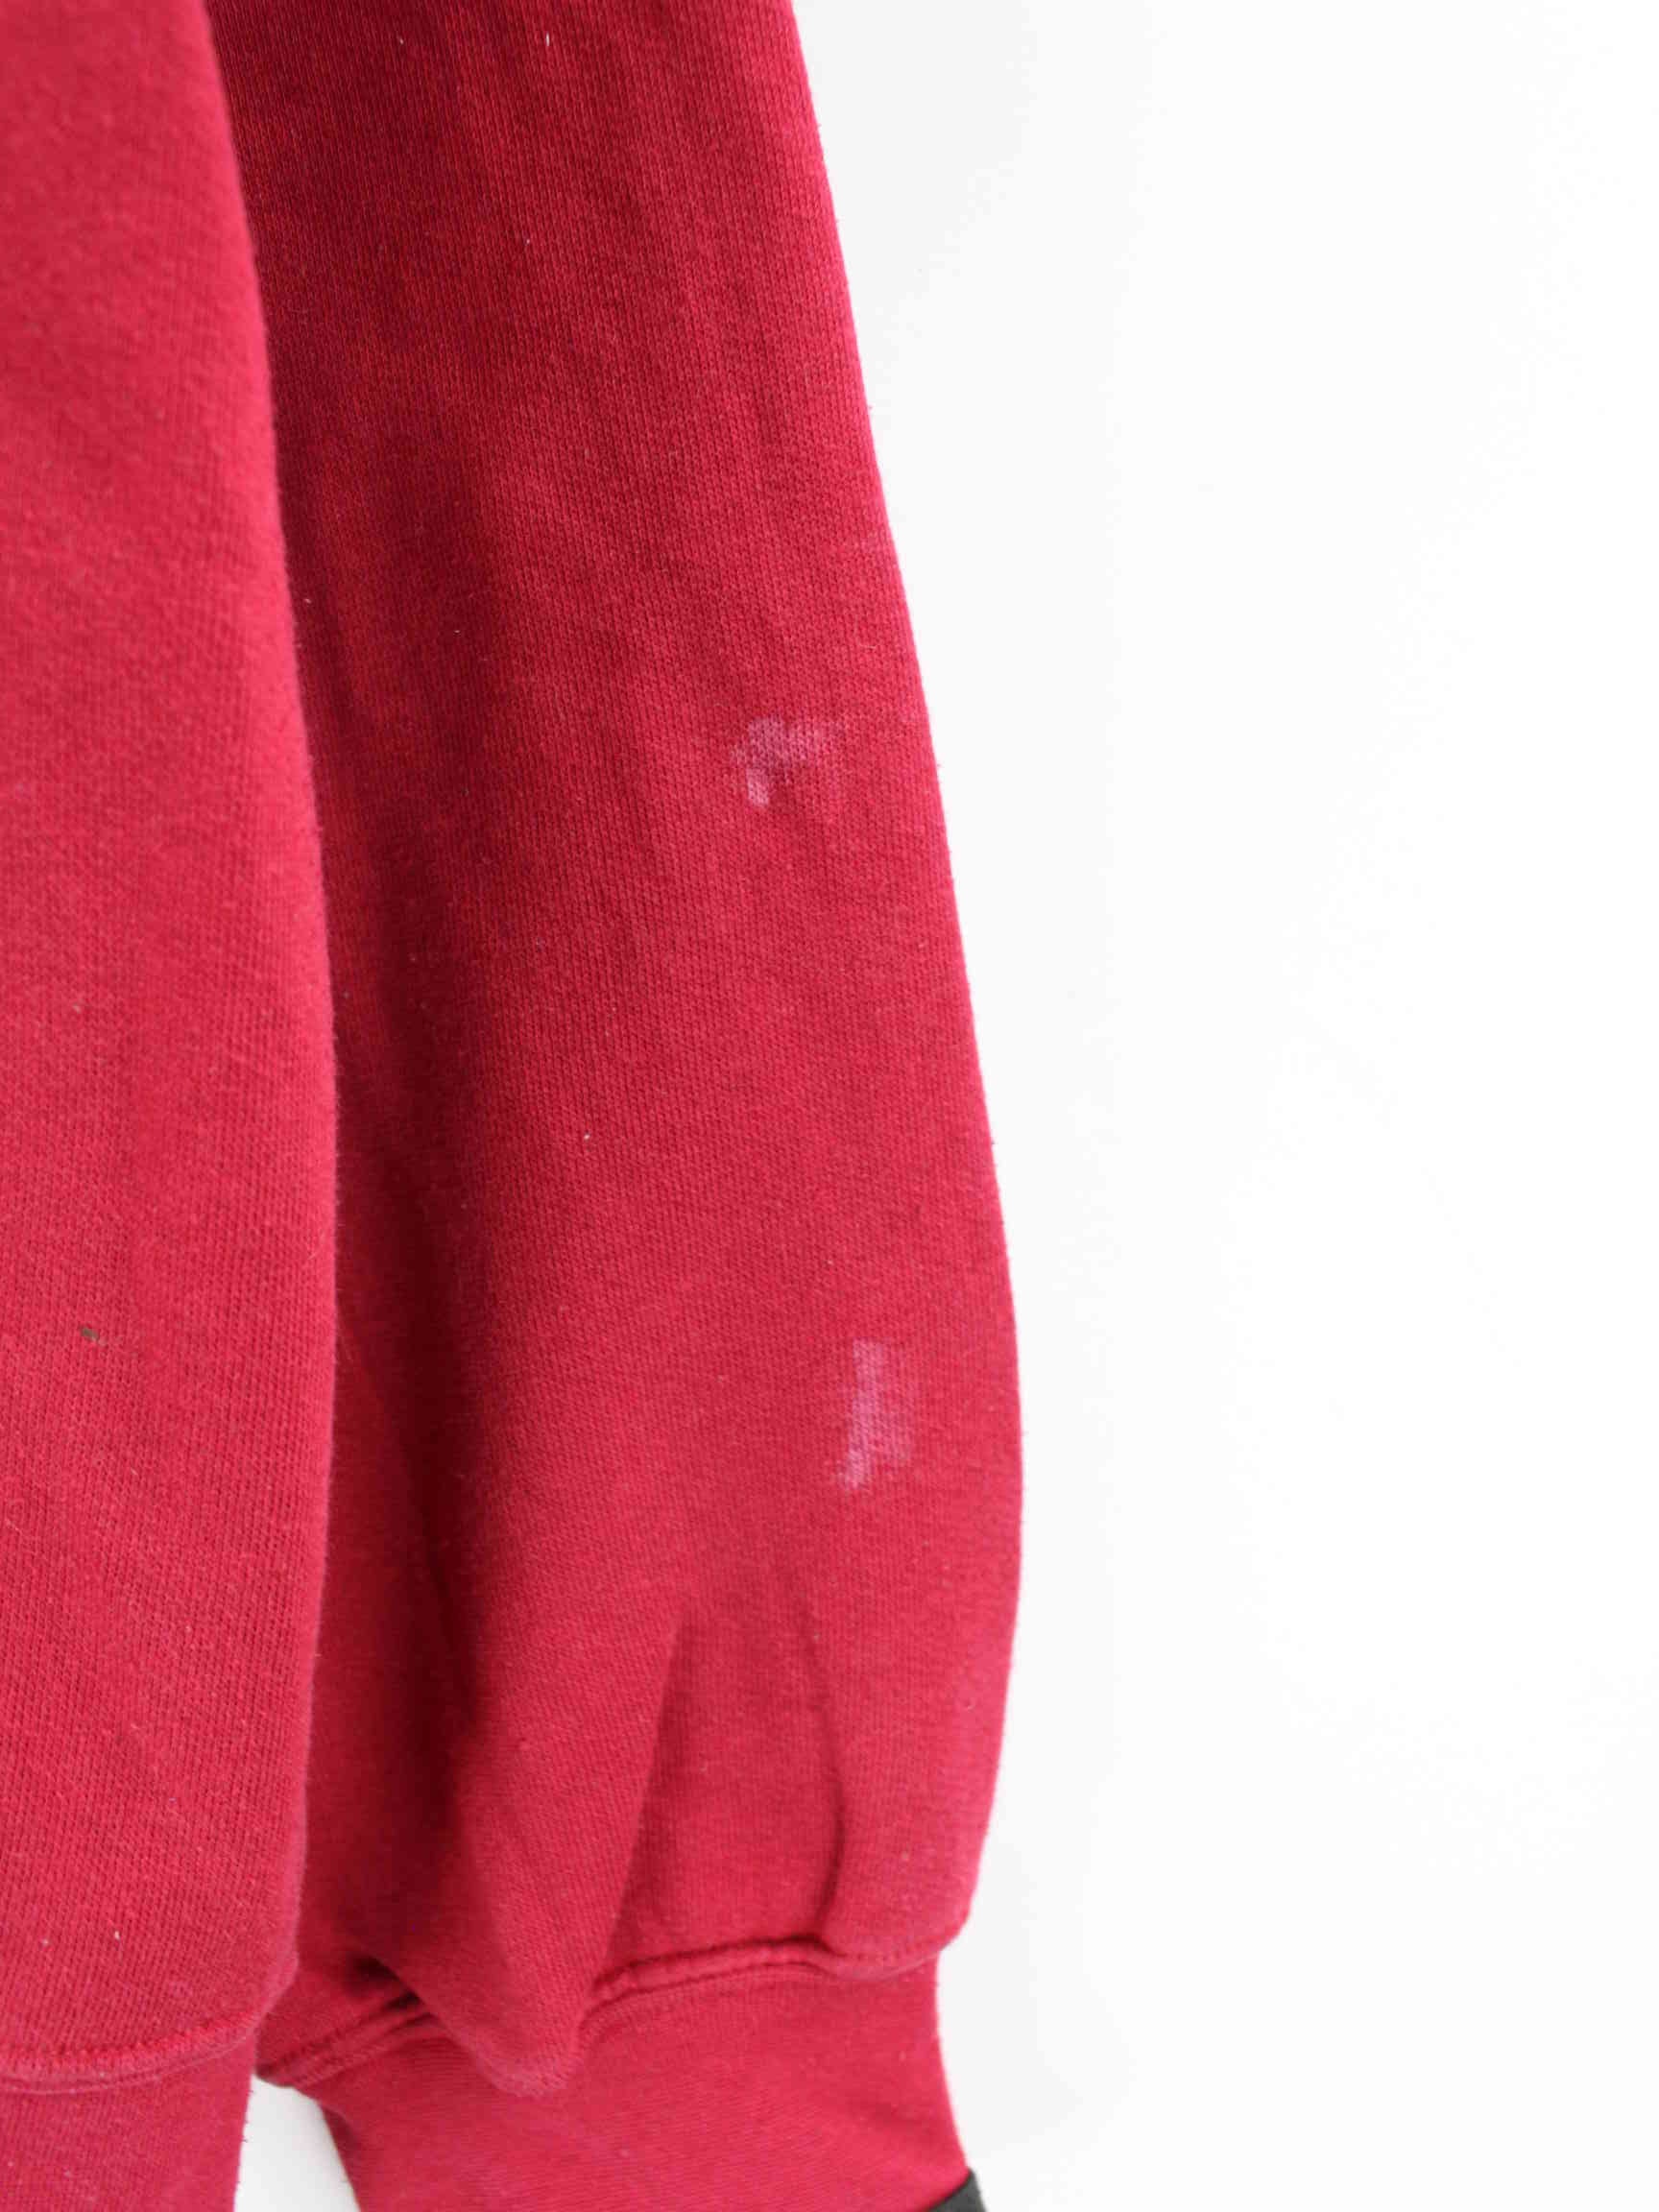 Nike 90s Vintage Embroidered Half Zip Sweater Rot L (detail image 3)